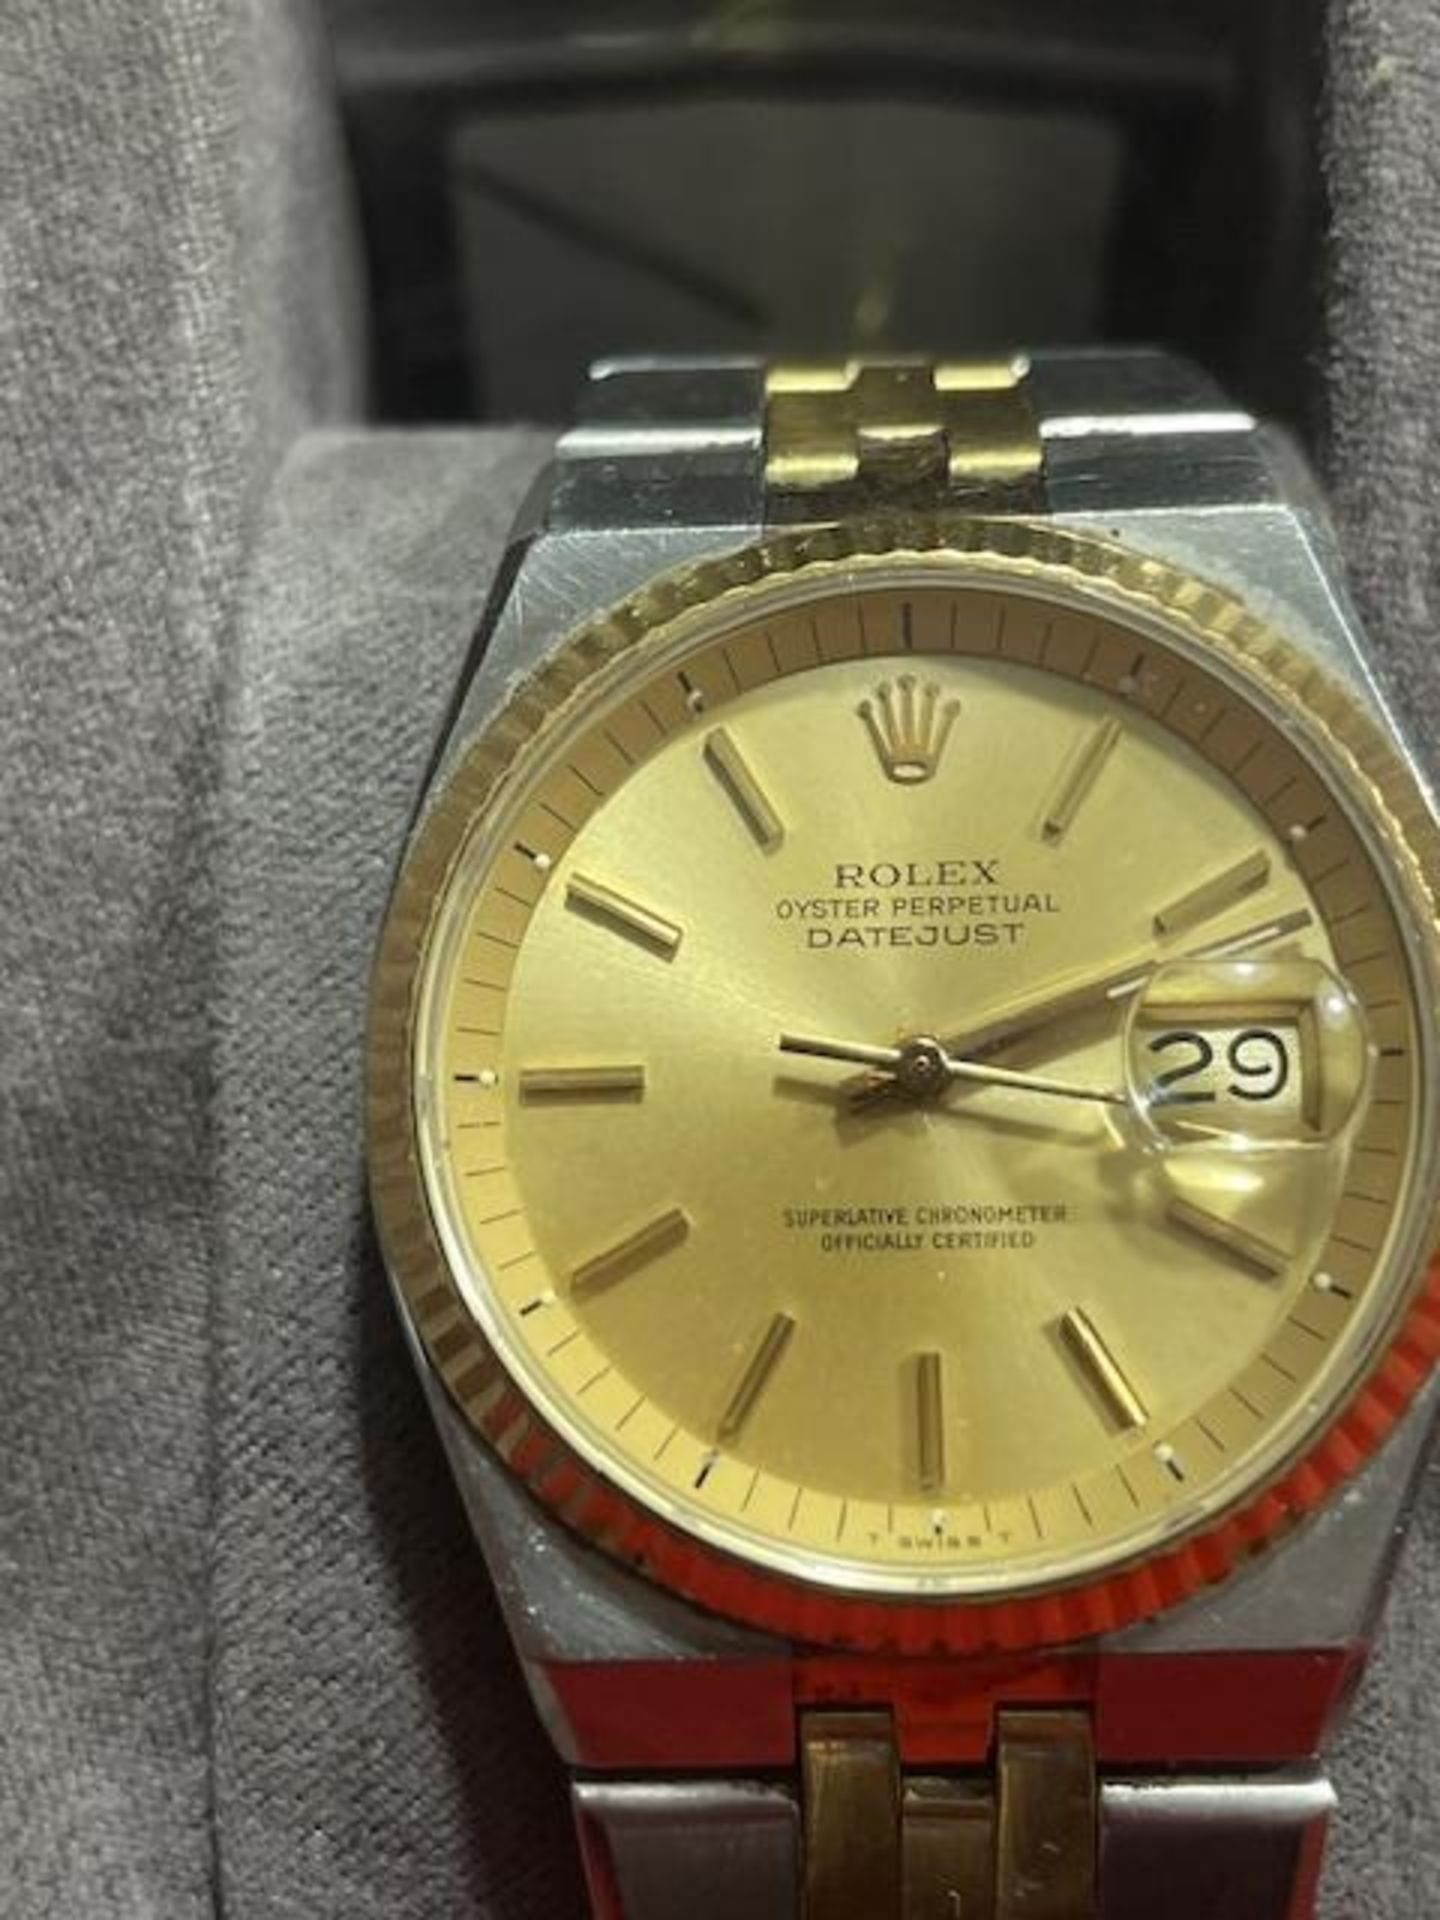 Rolex Oyster Purpetual DATEJUST Mens Watch - Image 6 of 10